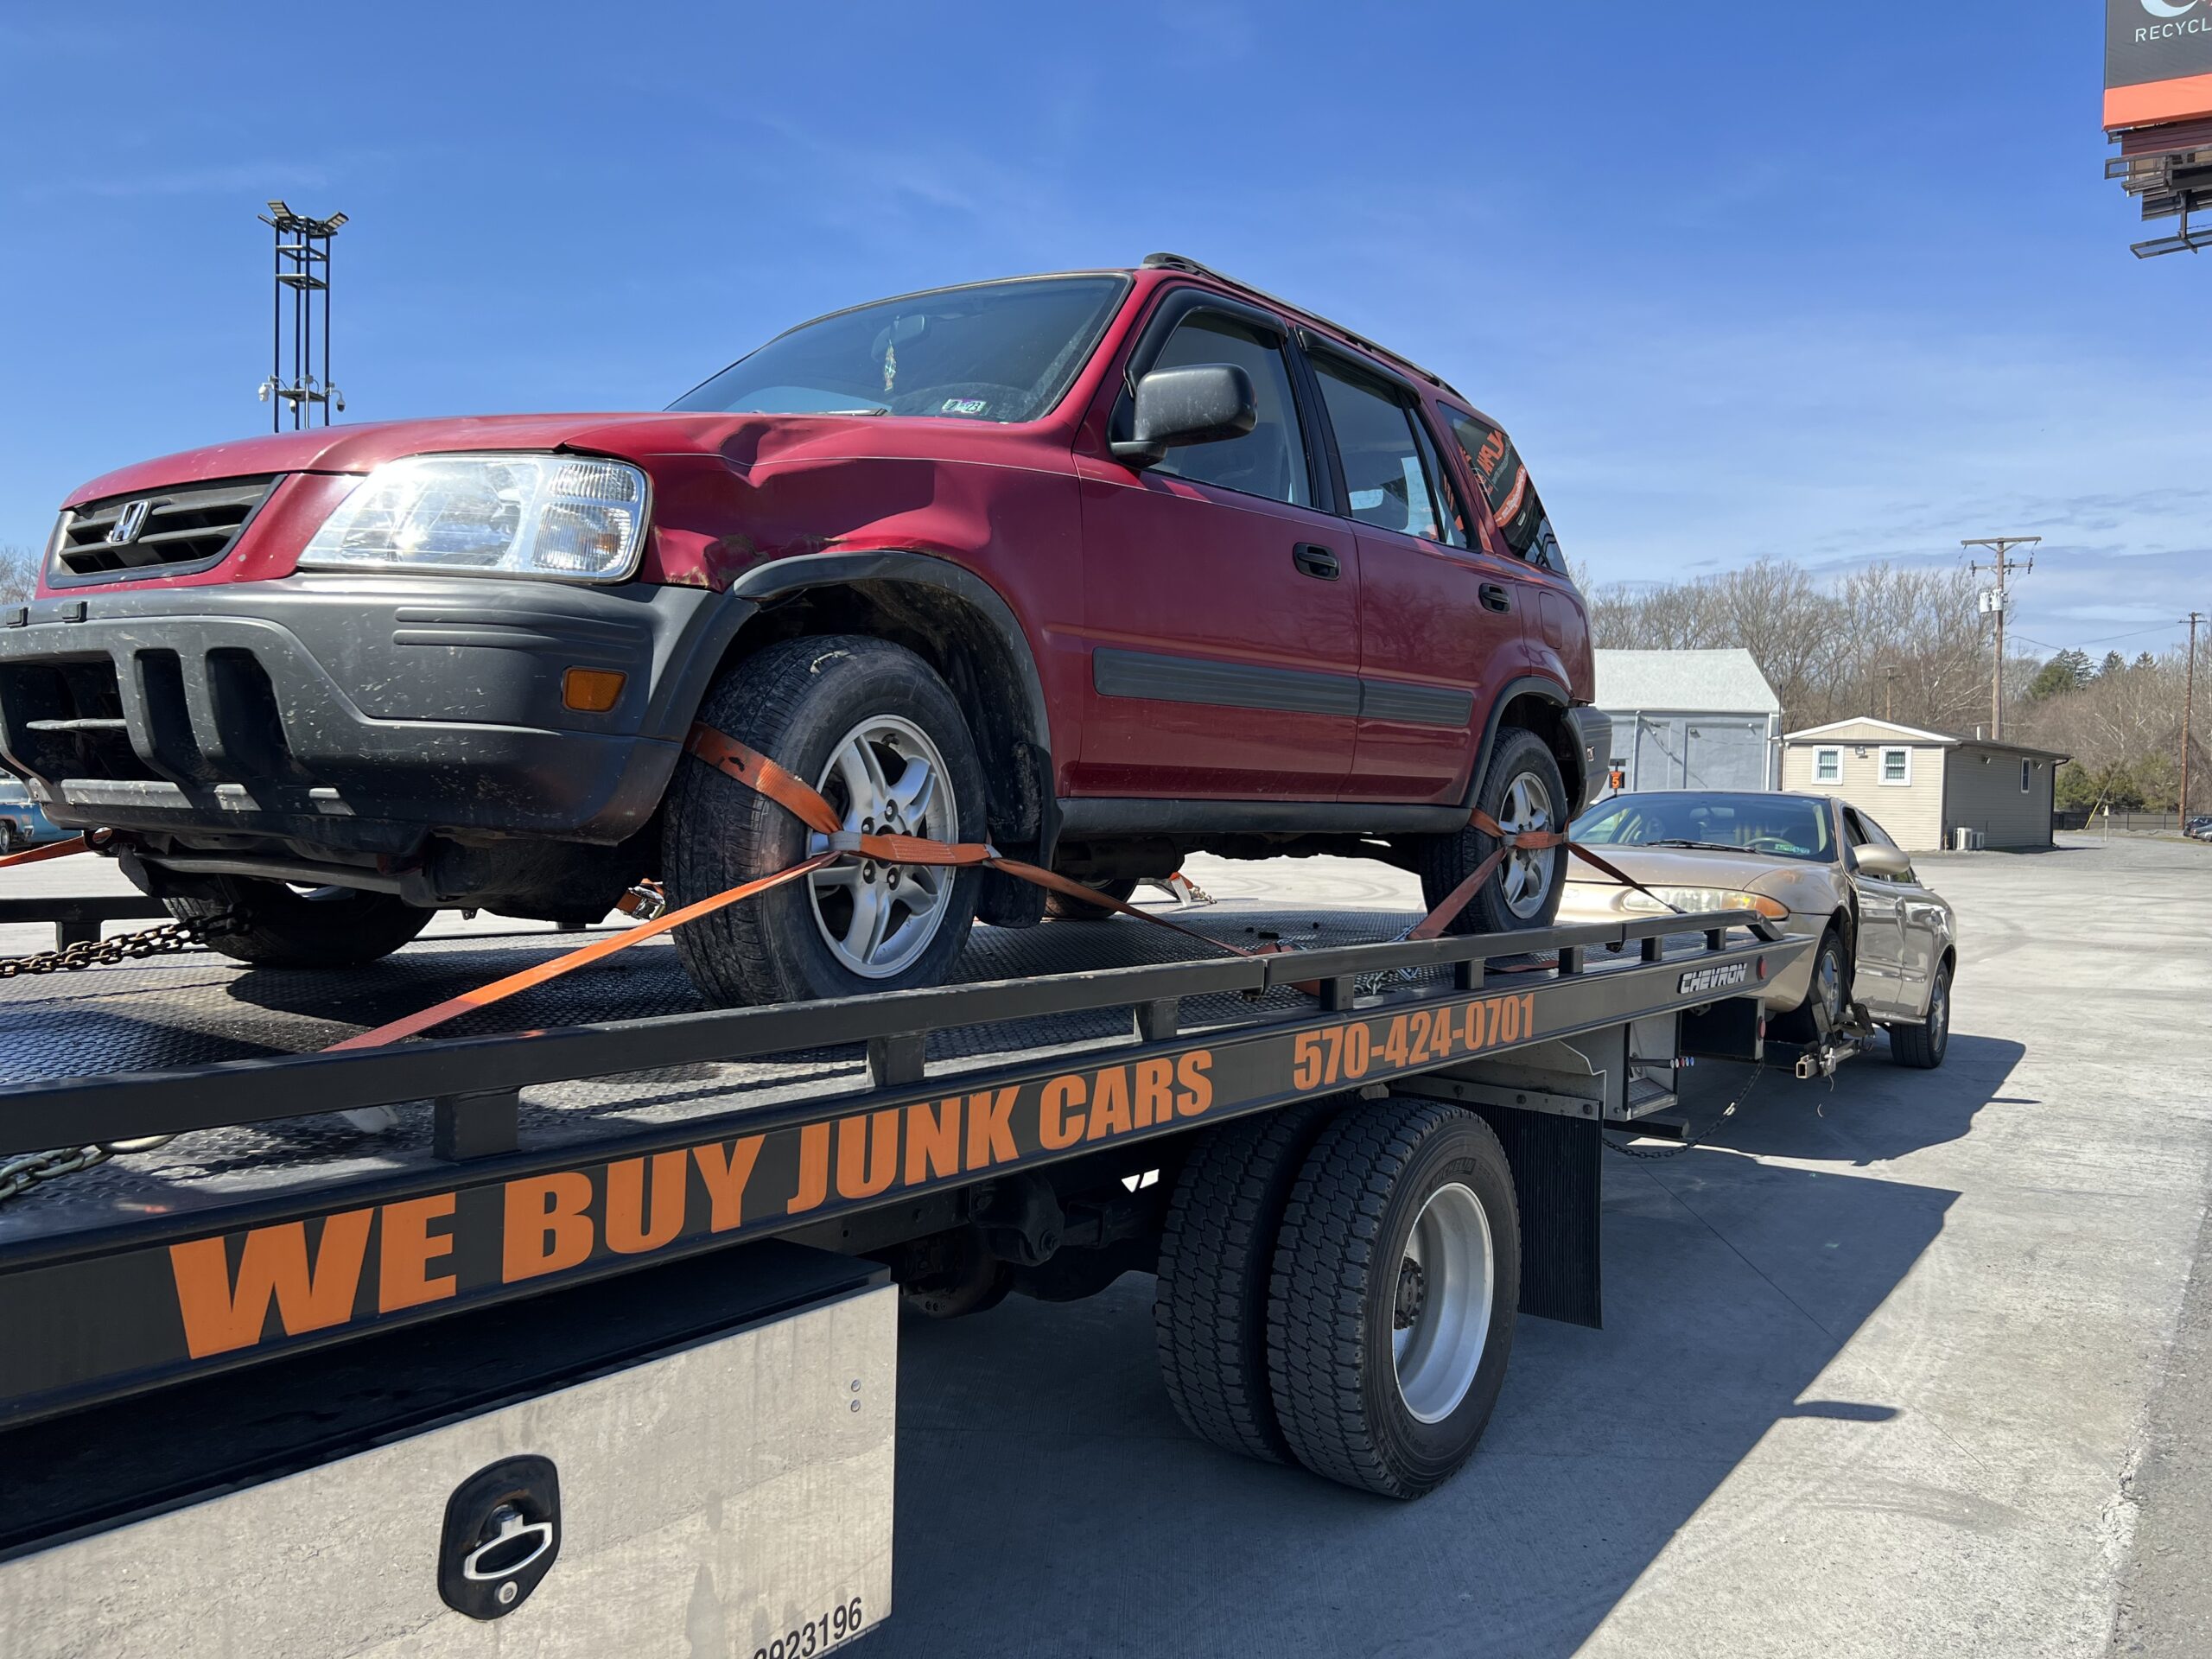 Cash for junk in Cars in PA